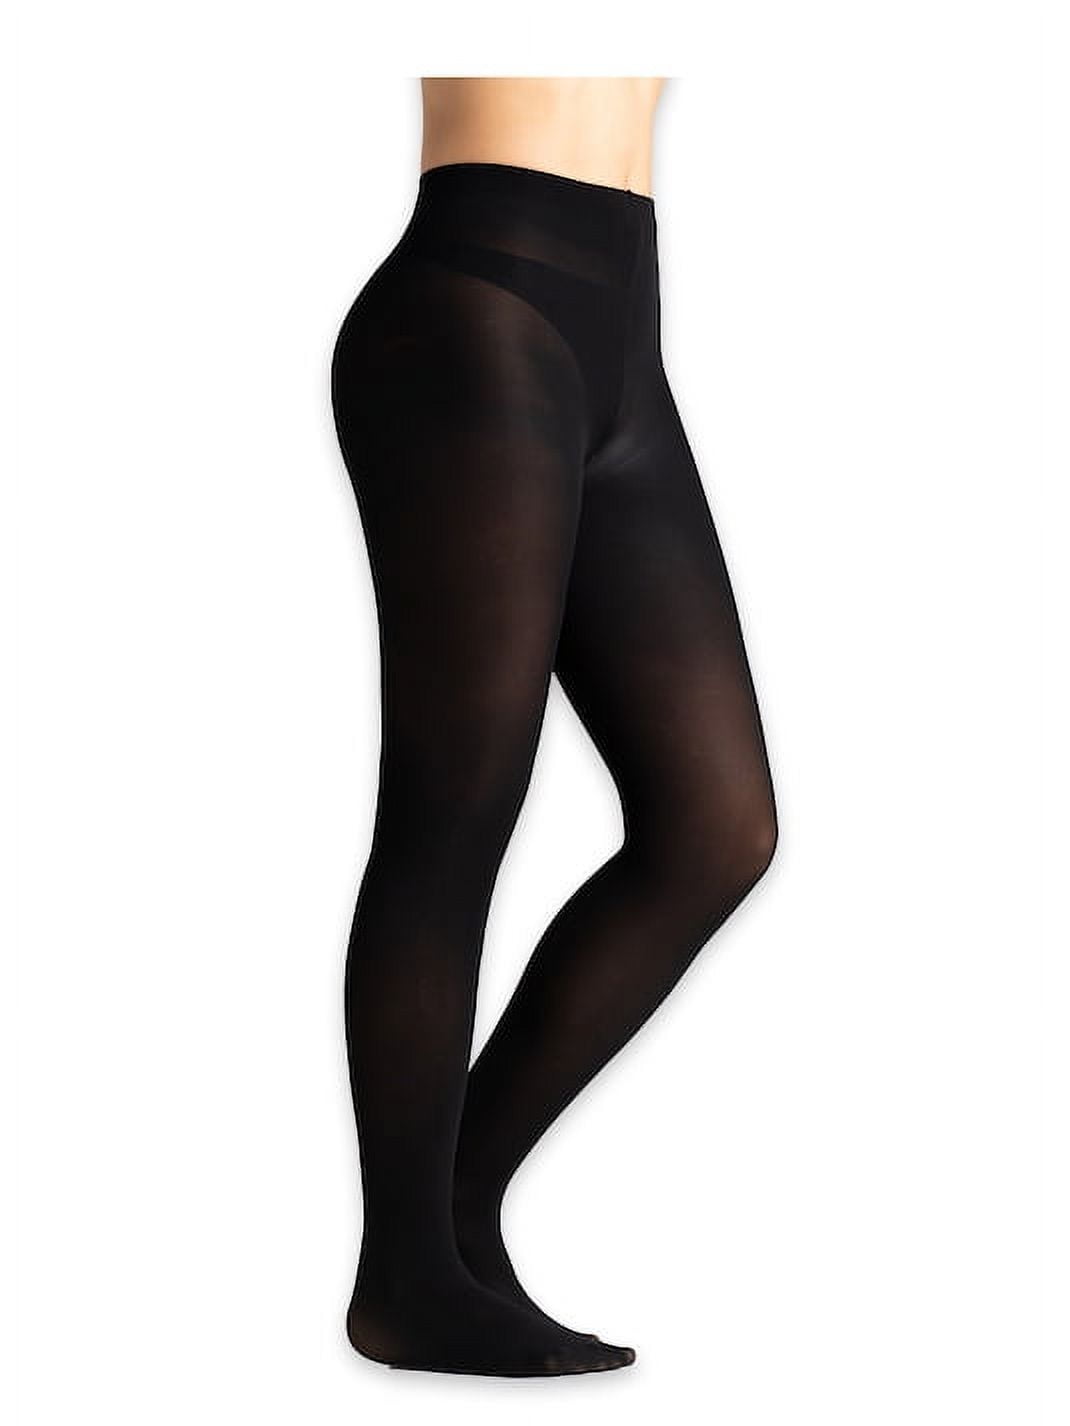 Star Power By SPANX Patterned Shaping Sheers Dots Tights 2231 BNIP (RARE)  8439532539382 on eBid United States